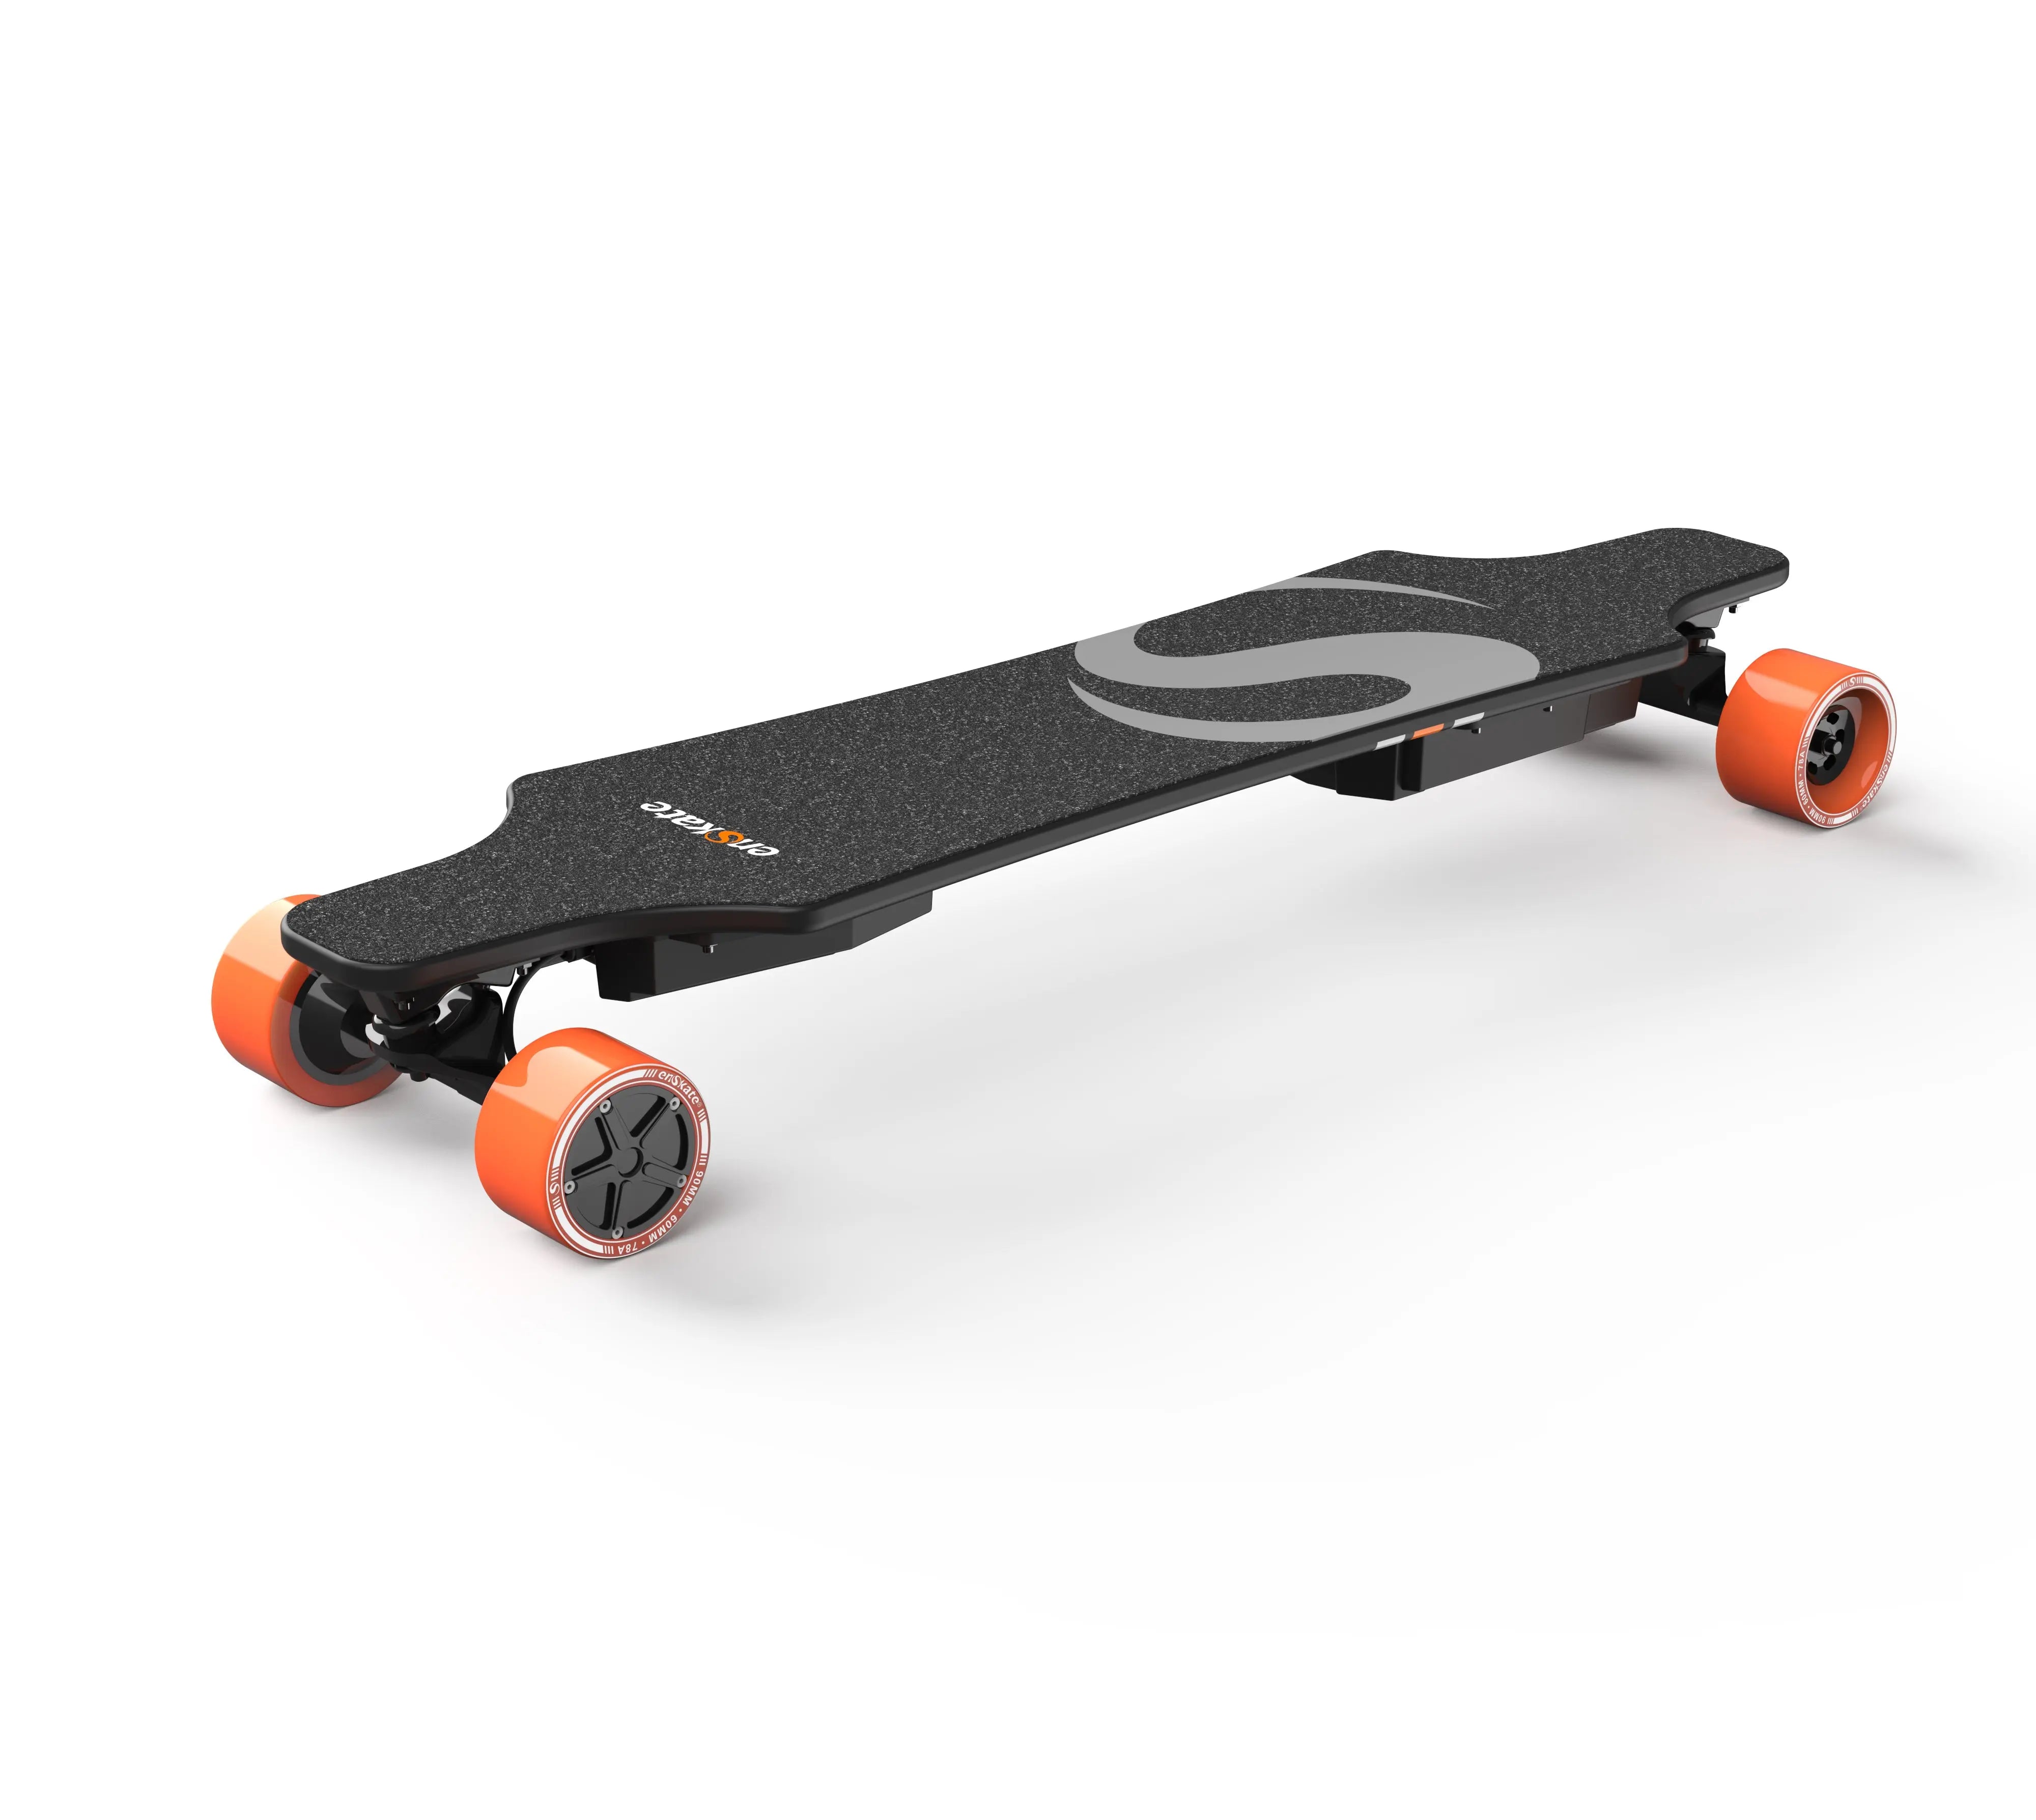 MAD REBEL ELECTRIC SKATEBOARD 電動スケボー - その他